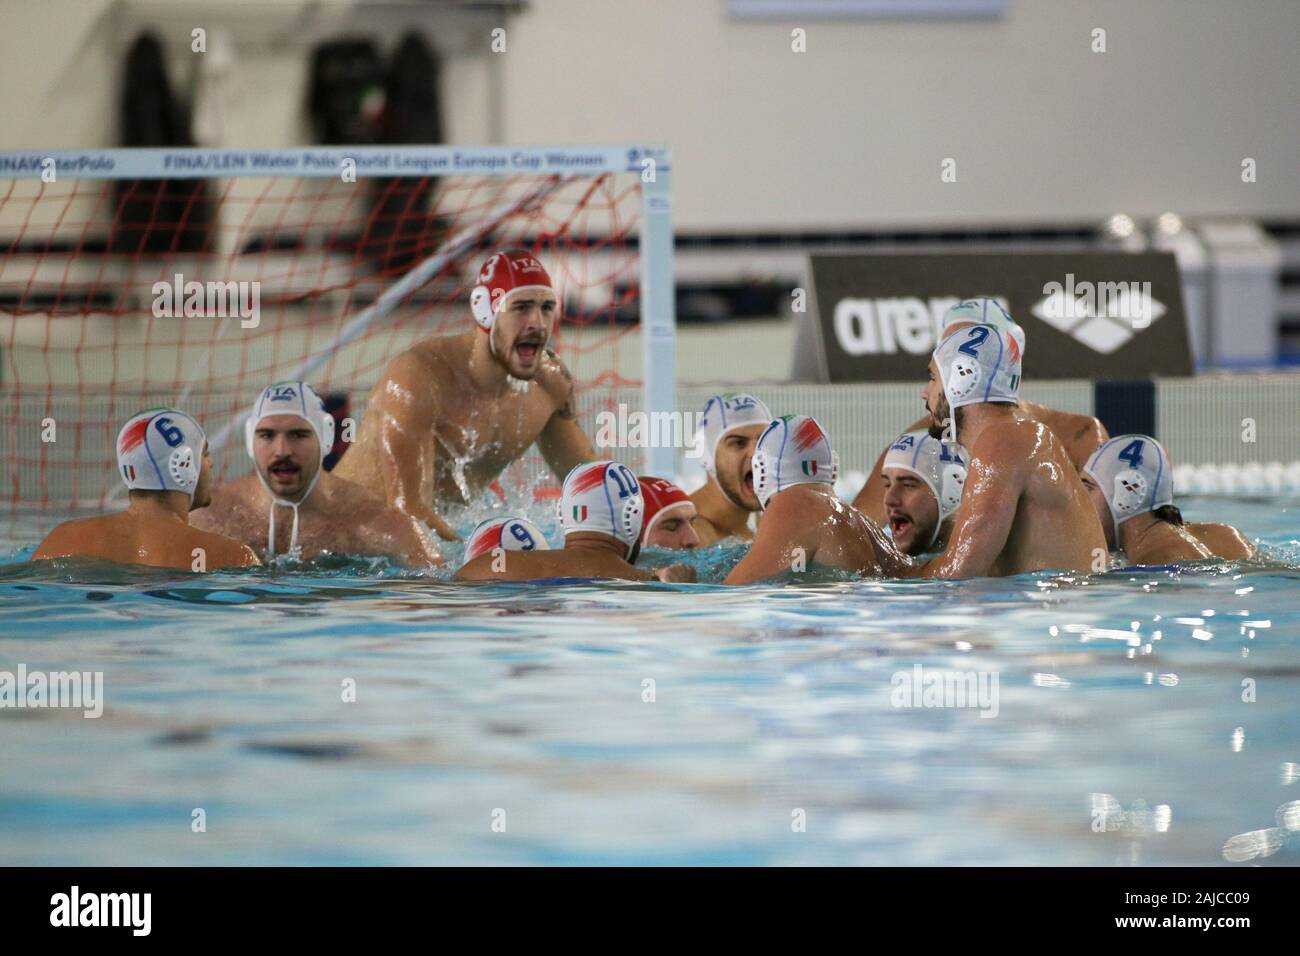 Cuneo, Italy. 3rd Jan, 2020. italian national teamduring International Quadrangular - Italy vs Greece, Waterpolo Italian National Team in Cuneo, Italy, January 03 2020 - LPS/Claudio Benedetto Credit: Claudio Benedetto/LPS/ZUMA Wire/Alamy Live News Stock Photo